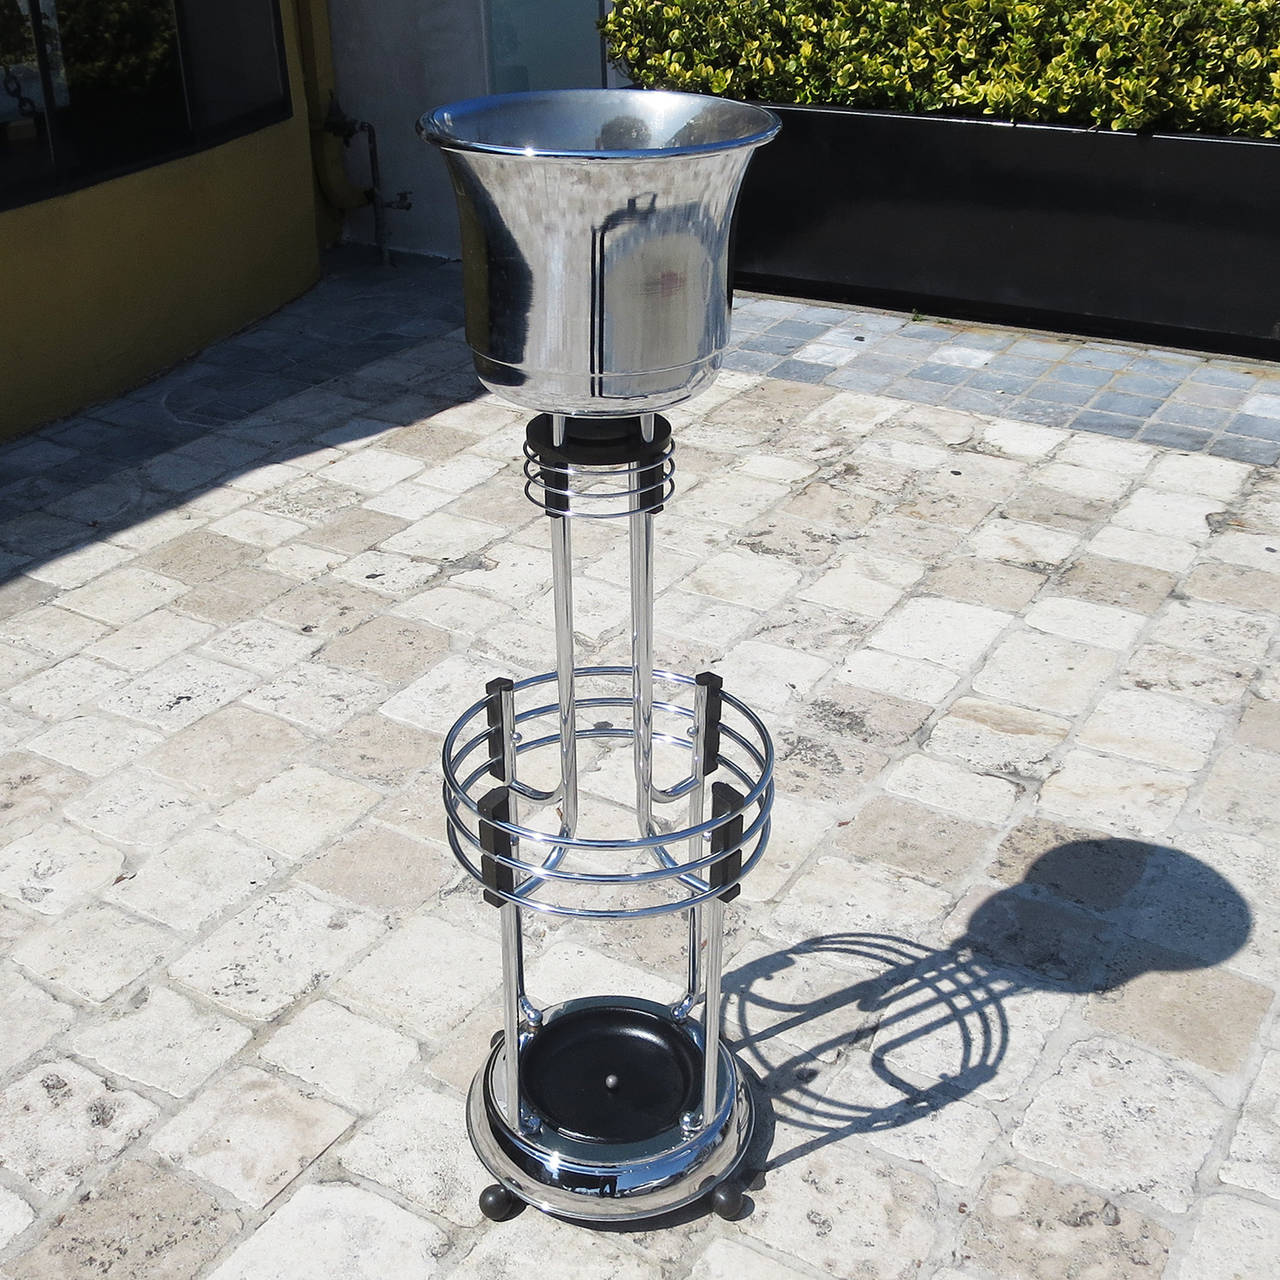 Add a touch of glamour to any room with this beautiful chromed stand. It could be utilized as a plant stand and umbrella stand in an entryway, or as a table side wine or champagne holder. The chrome is in great original condition and displays